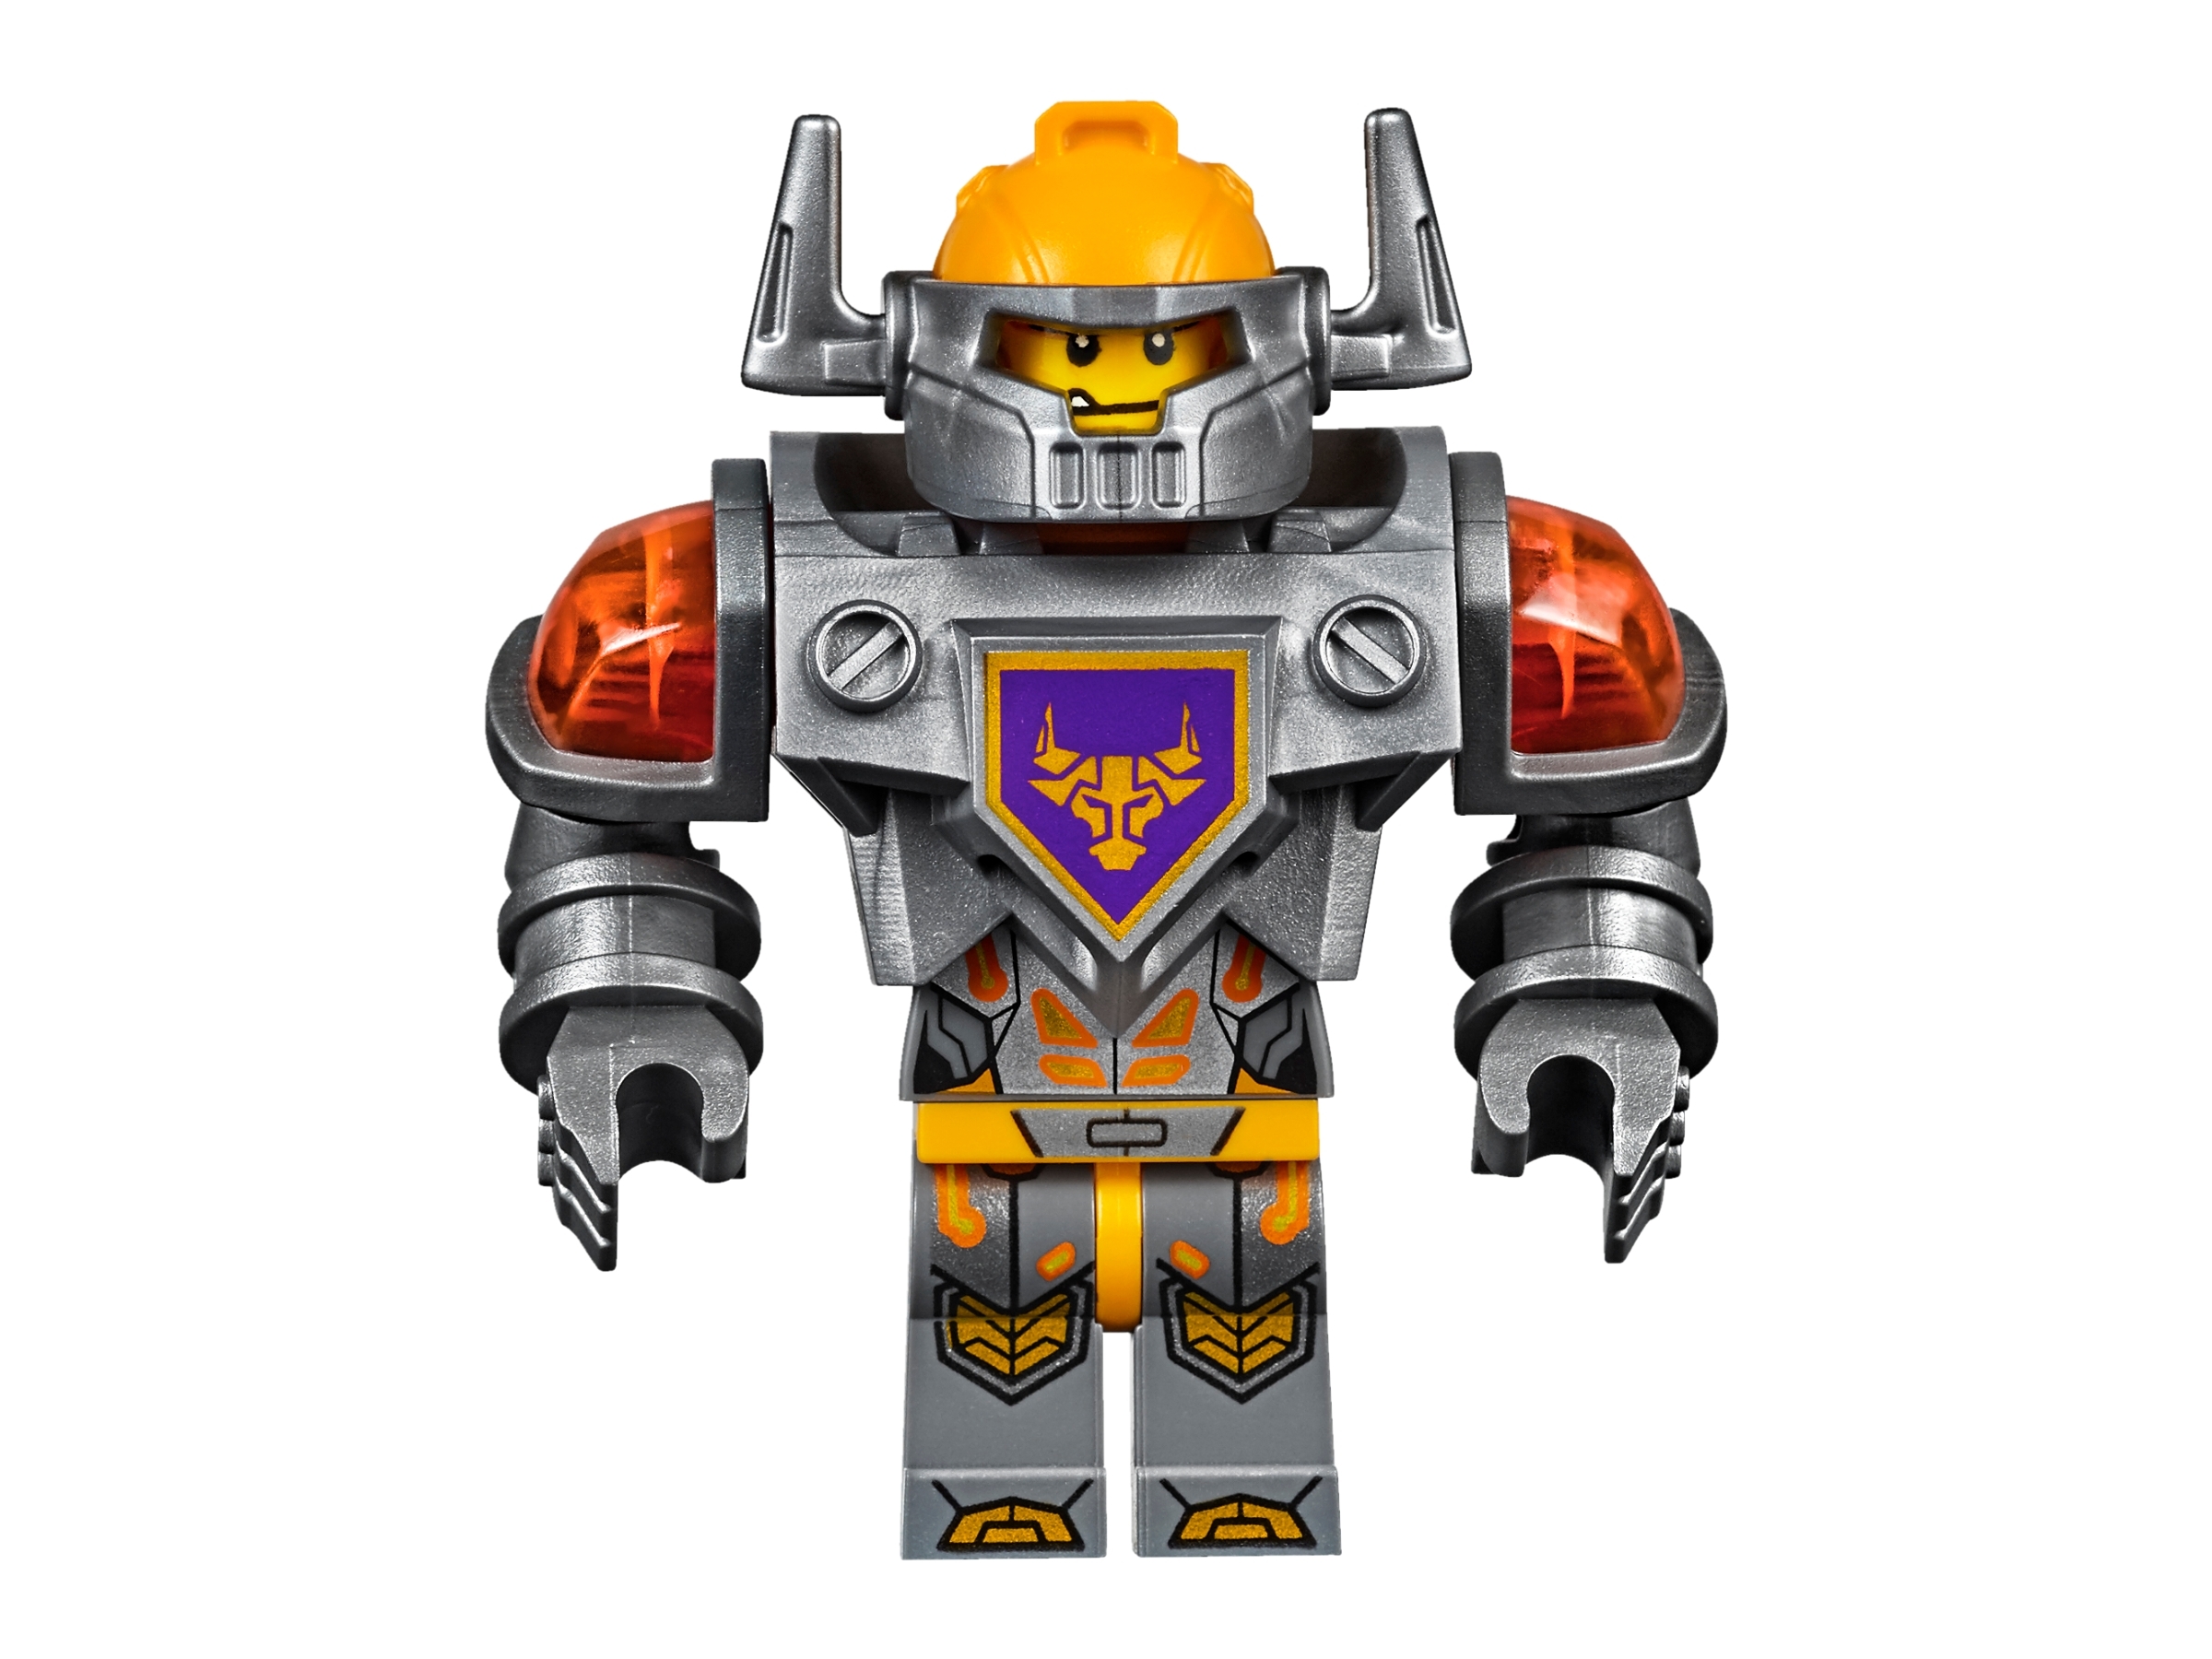 Bulk boks barm Axl's Tower Carrier 70322 | NEXO KNIGHTS™ | Buy online at the Official LEGO®  Shop US